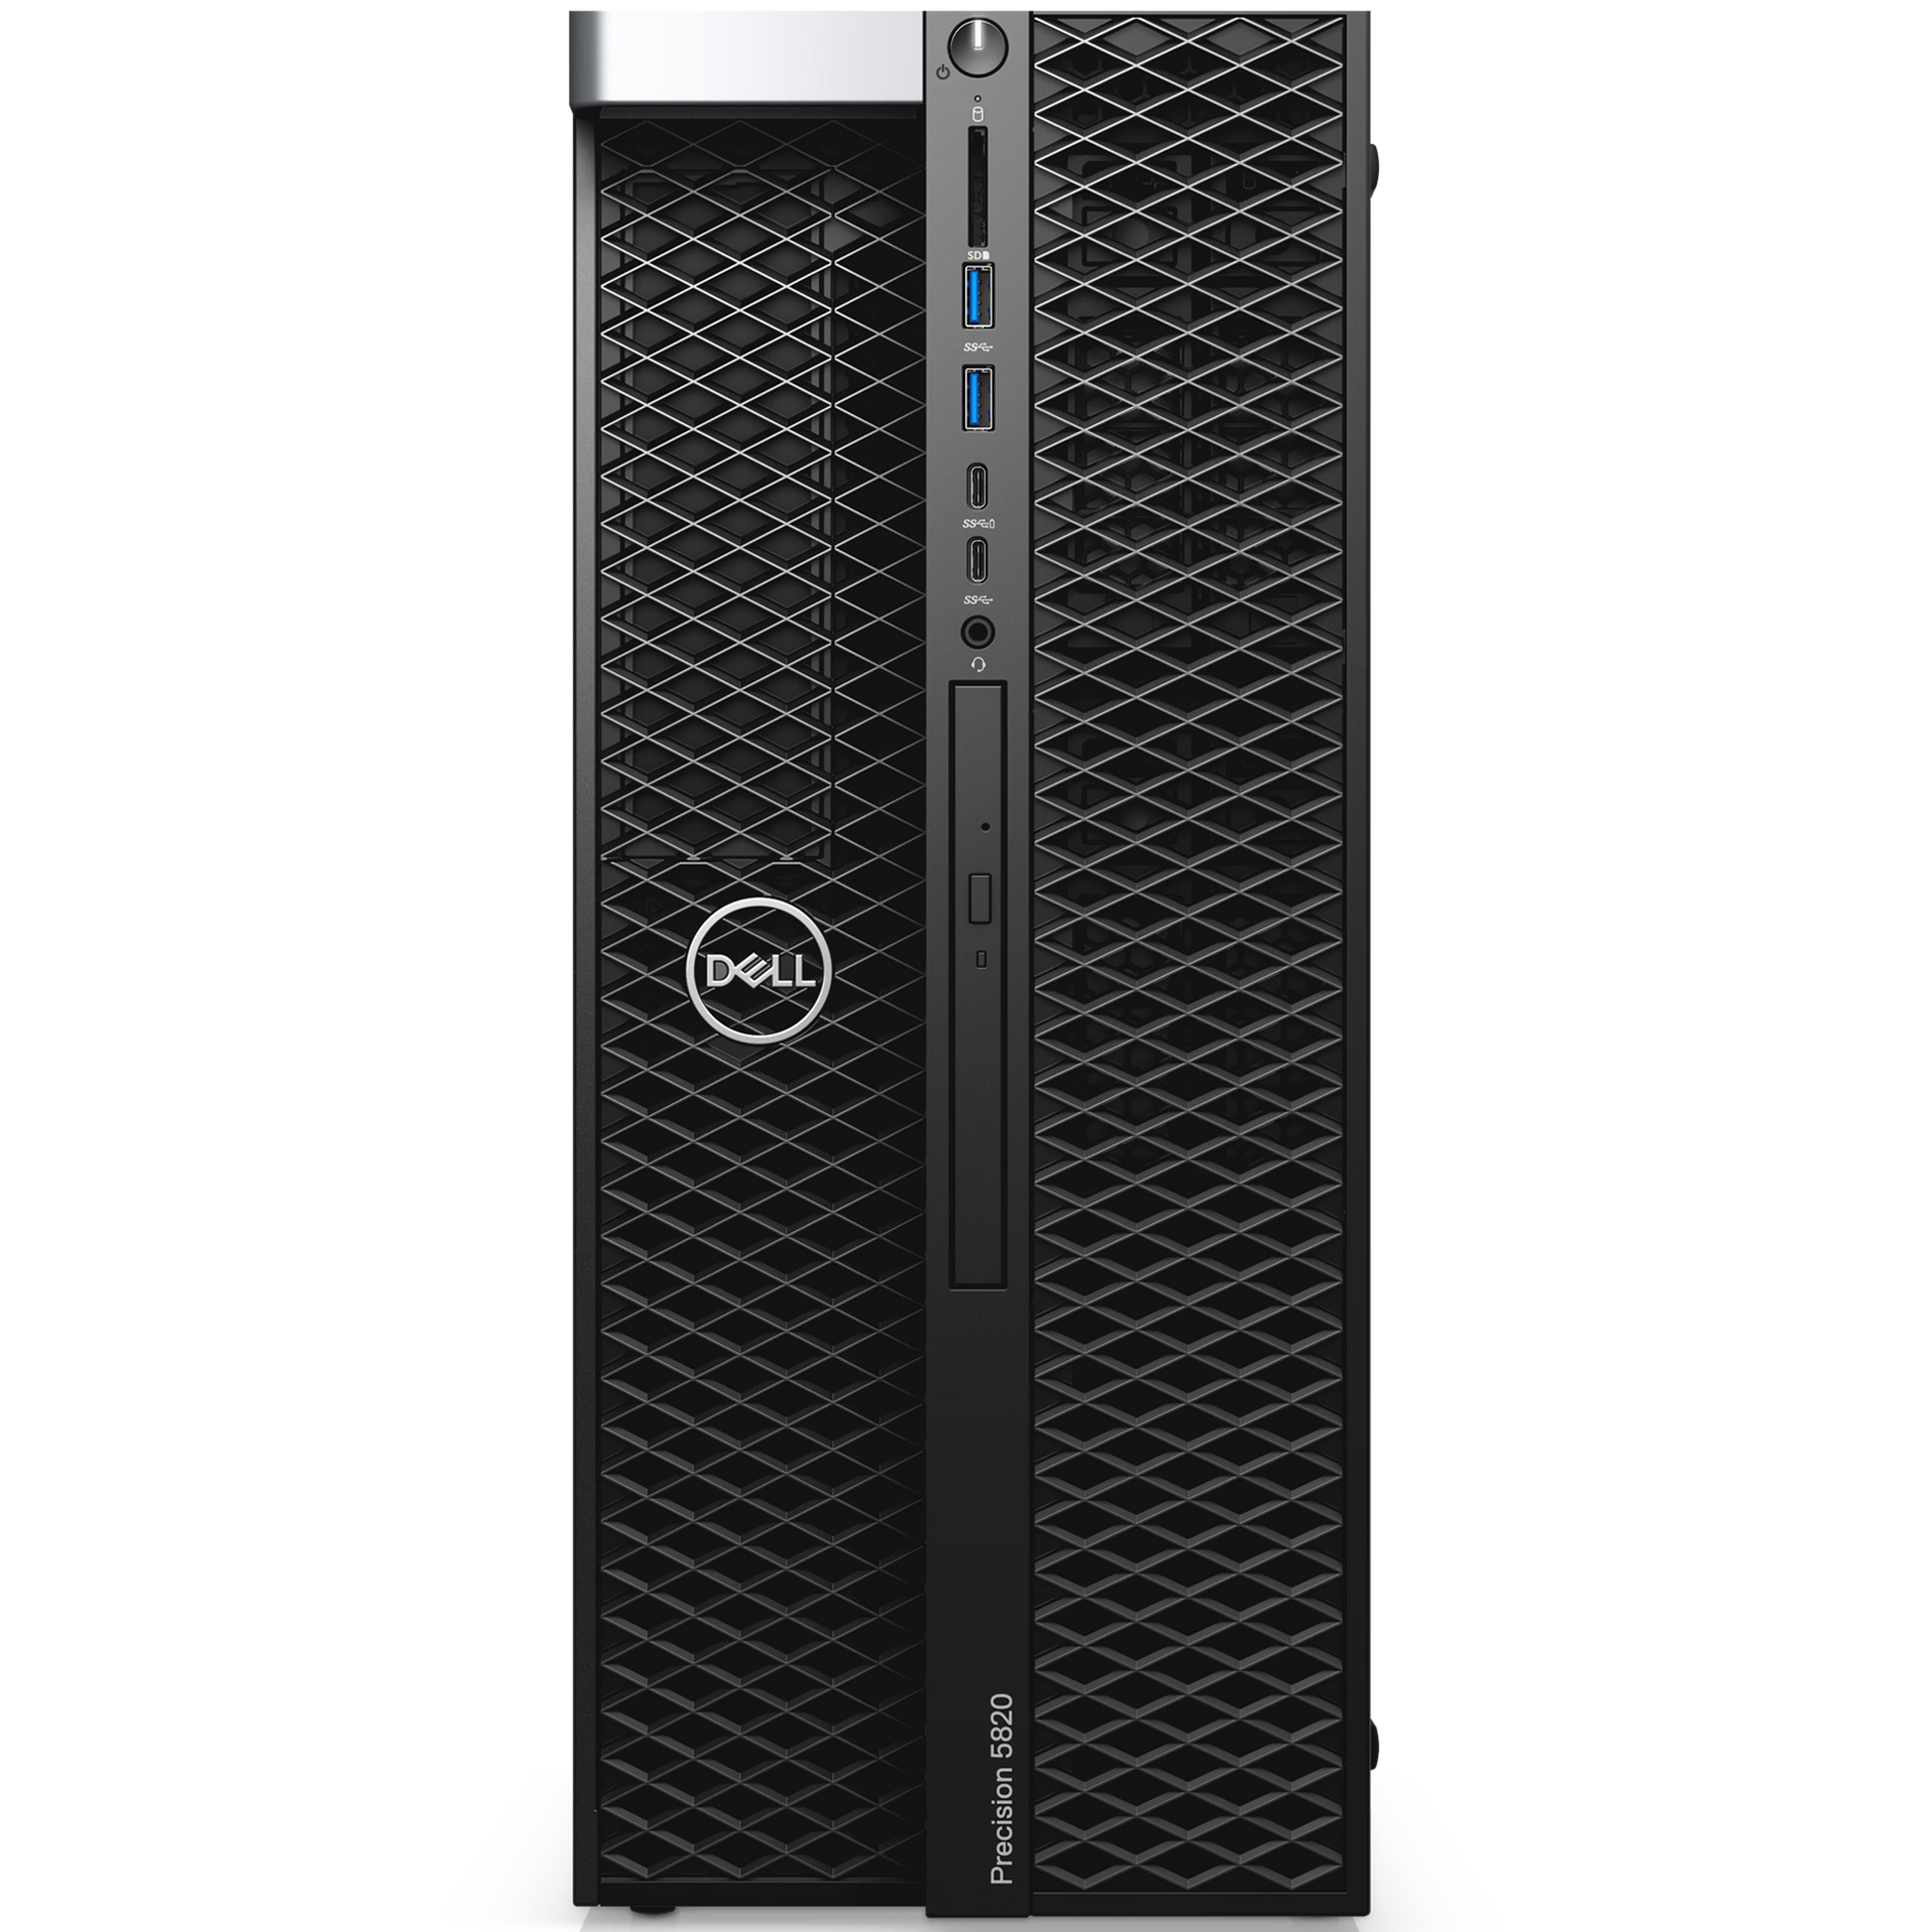 Dell Precision T5820 Intel Xeon Workstation PC with 32GB Ram Desktop Computers